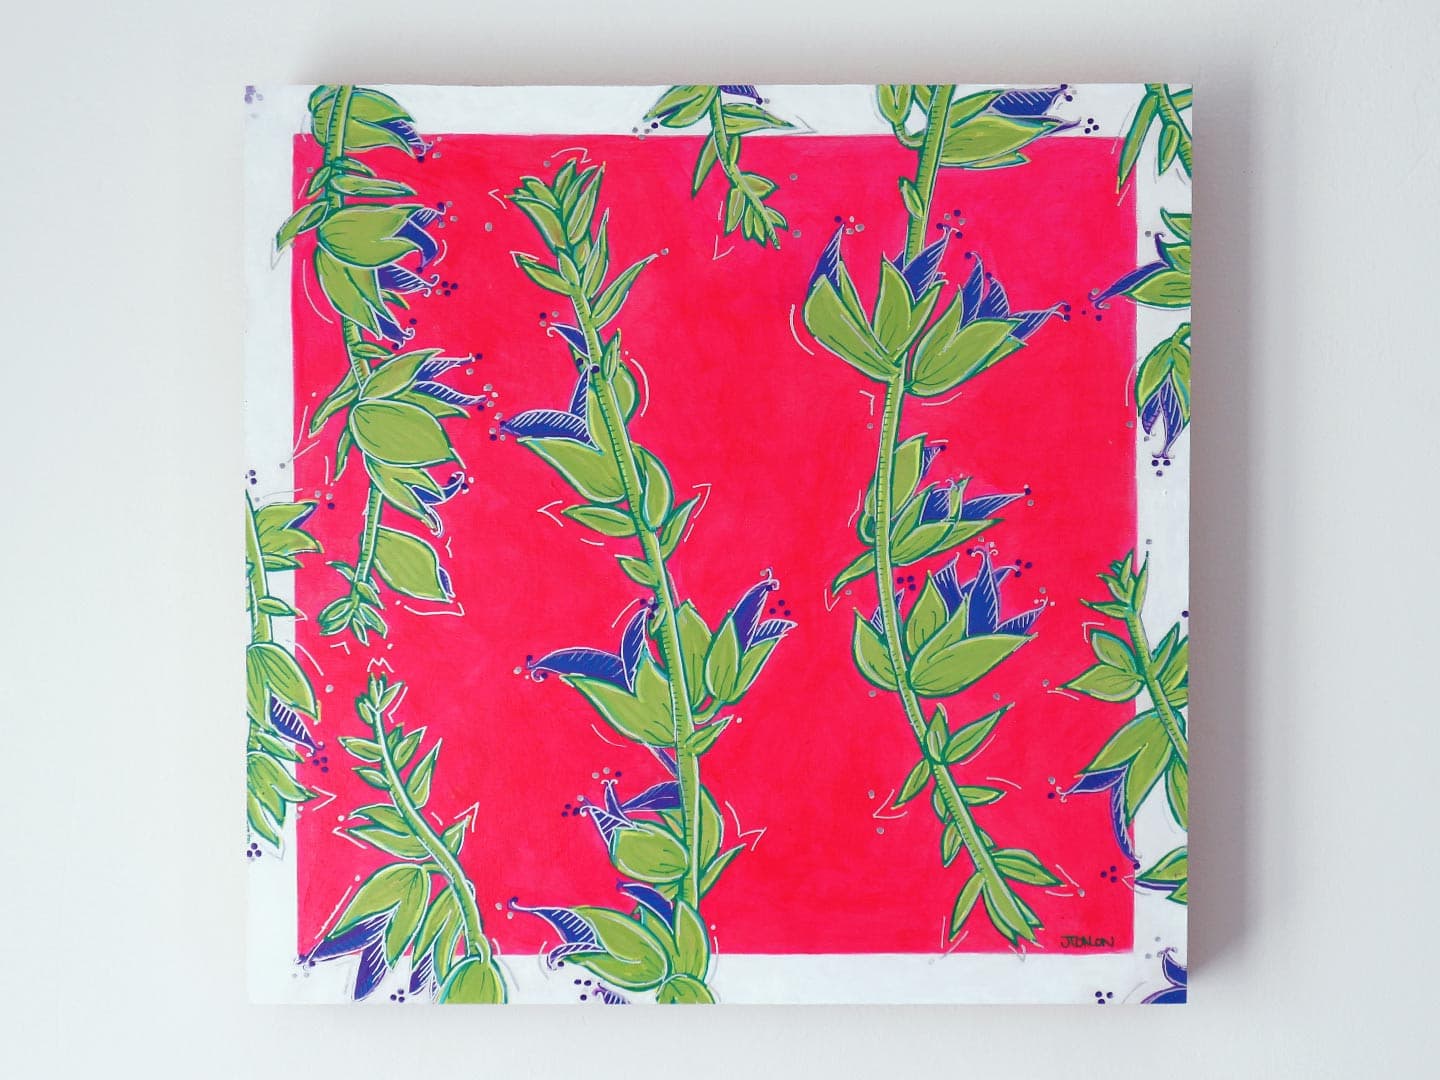 "Sweet sage": A bold botanical painting featuring sage with purple flowers set against a vibrant neon pink background hung on a white wall